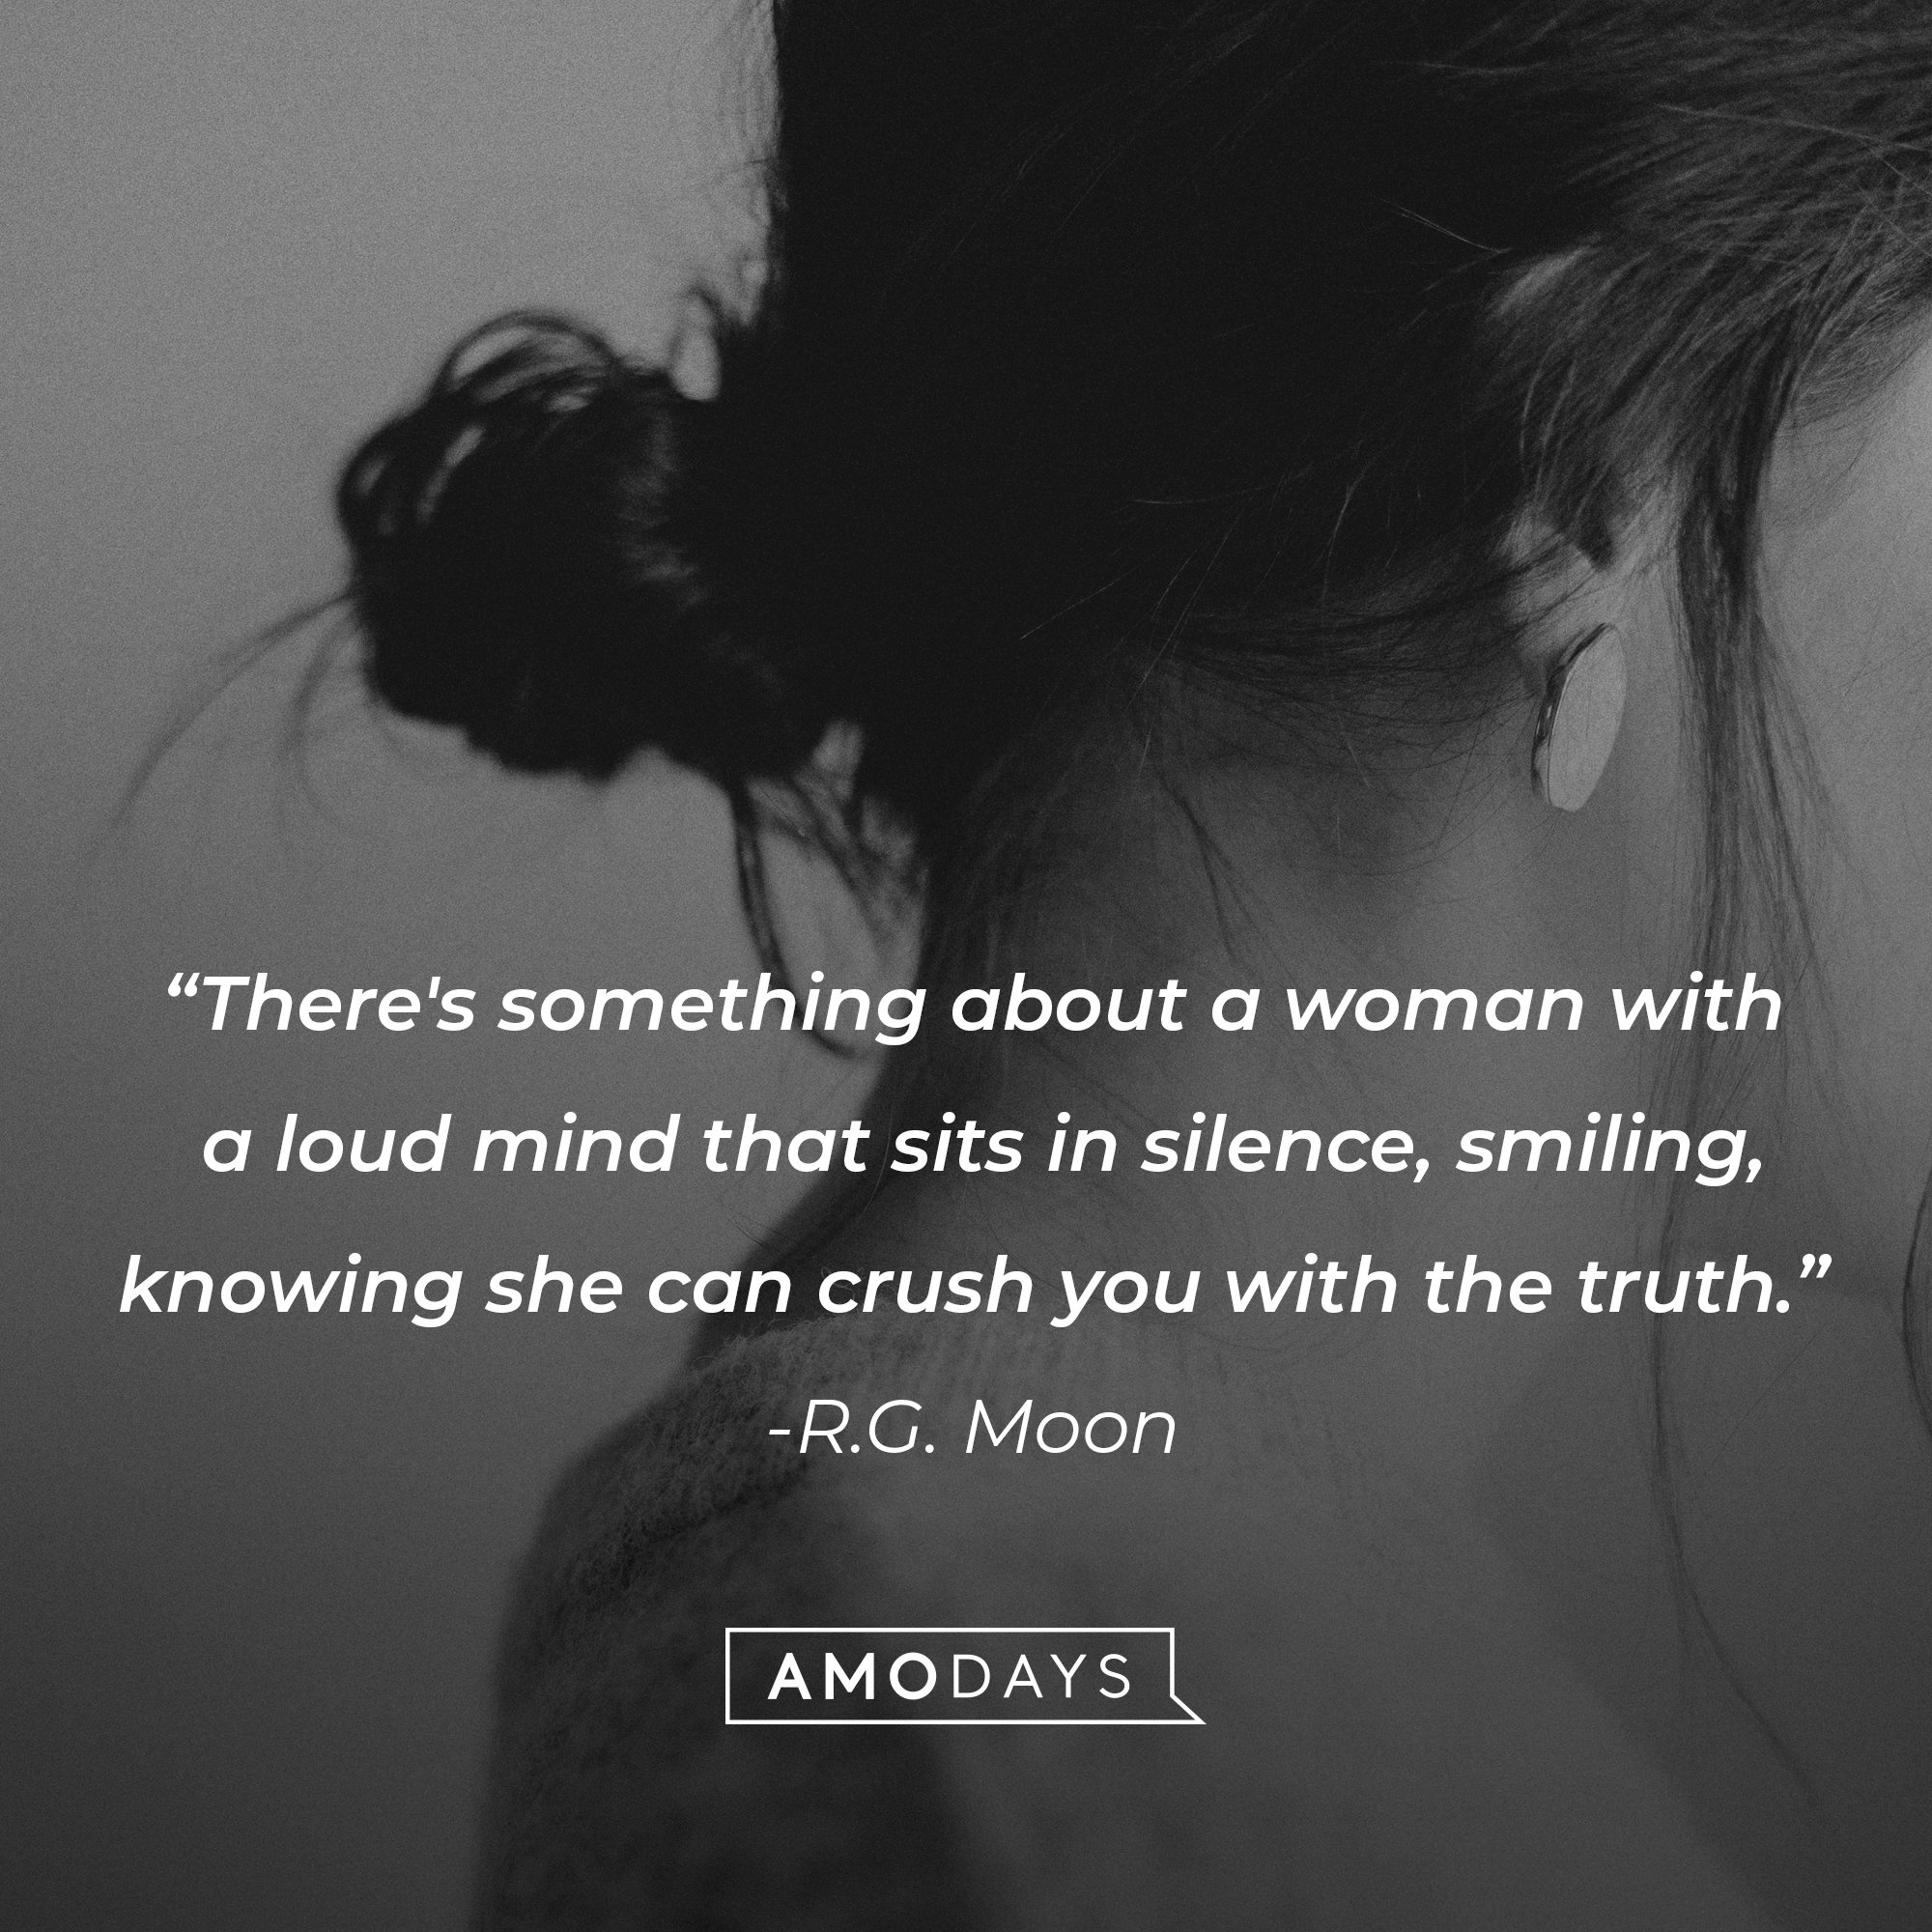 R.G. Moon’s quote: "There's something about a woman with a loud mind that sits in silence, smiling knowing she can crush you with the truth." | Image: AmoDays